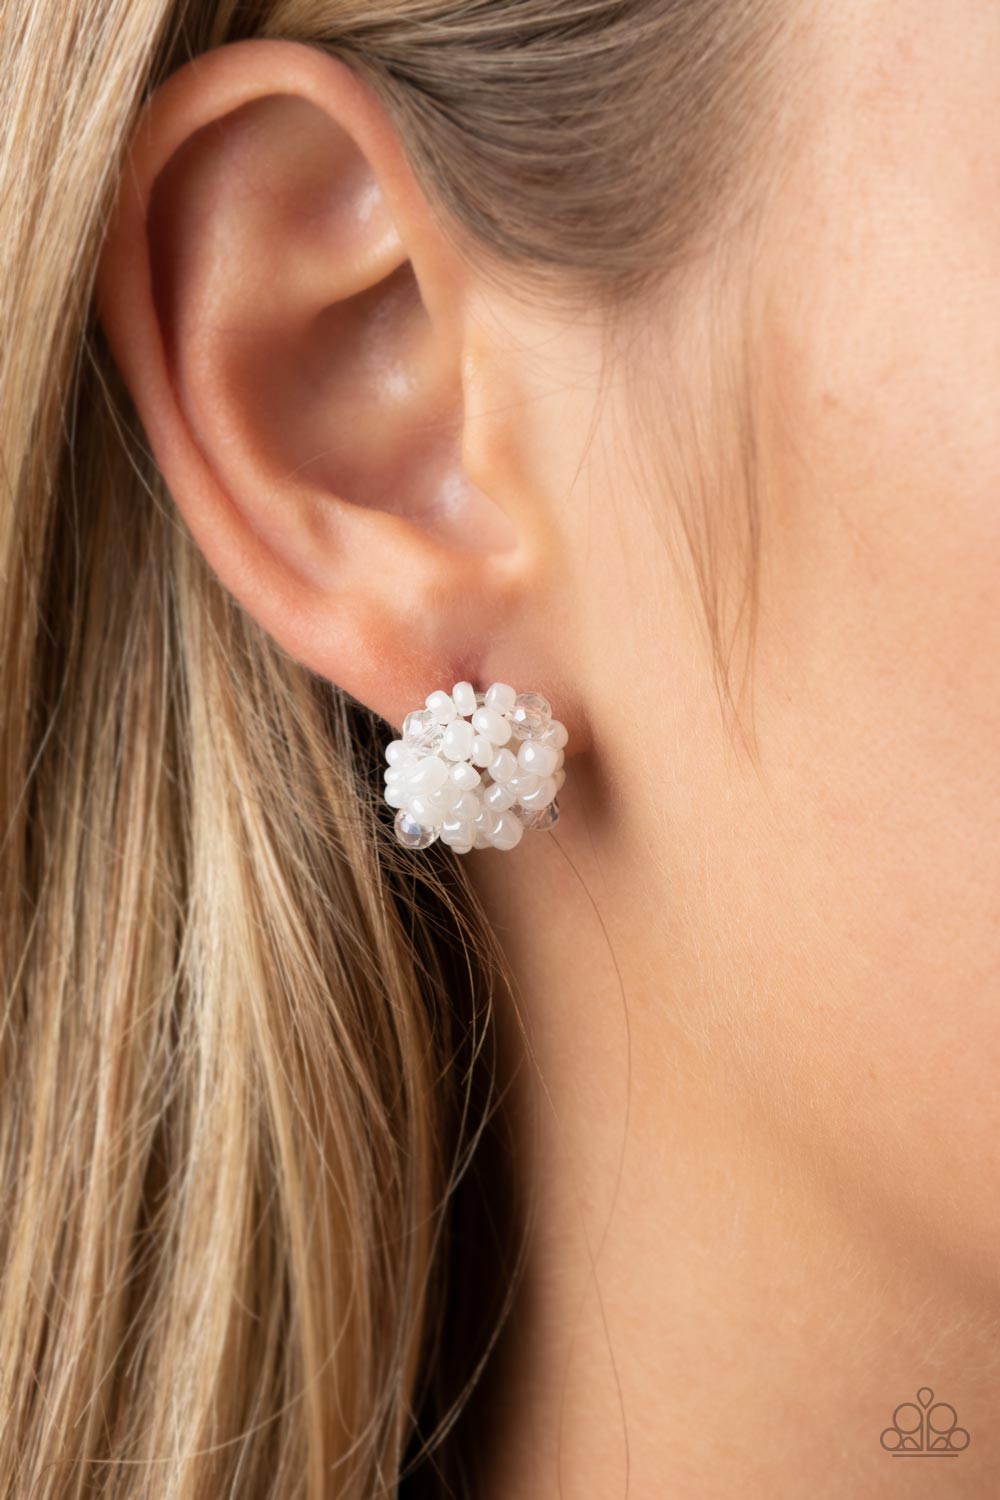 Bunches of Bubbly Earrings (Pink, White)